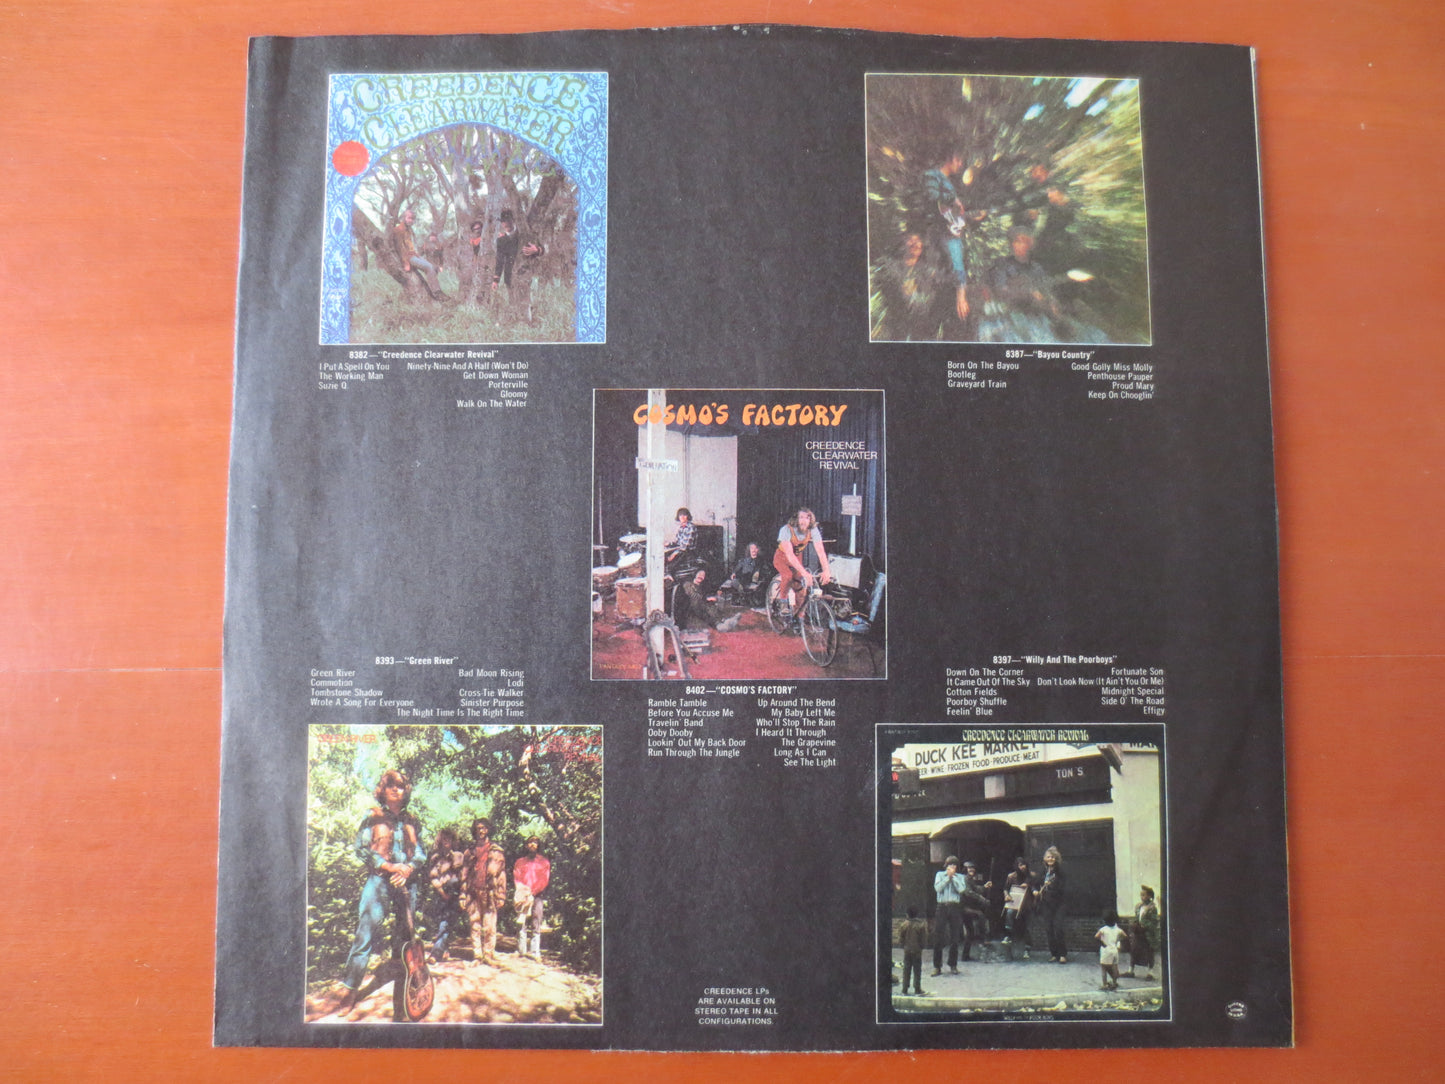 CCR, BAYOU COUNTRY, Creedence Clearwater Revival, Vintage Vinyl, Record Vinyl, Vinyl Record, Rock Record, lps, 1969 Record